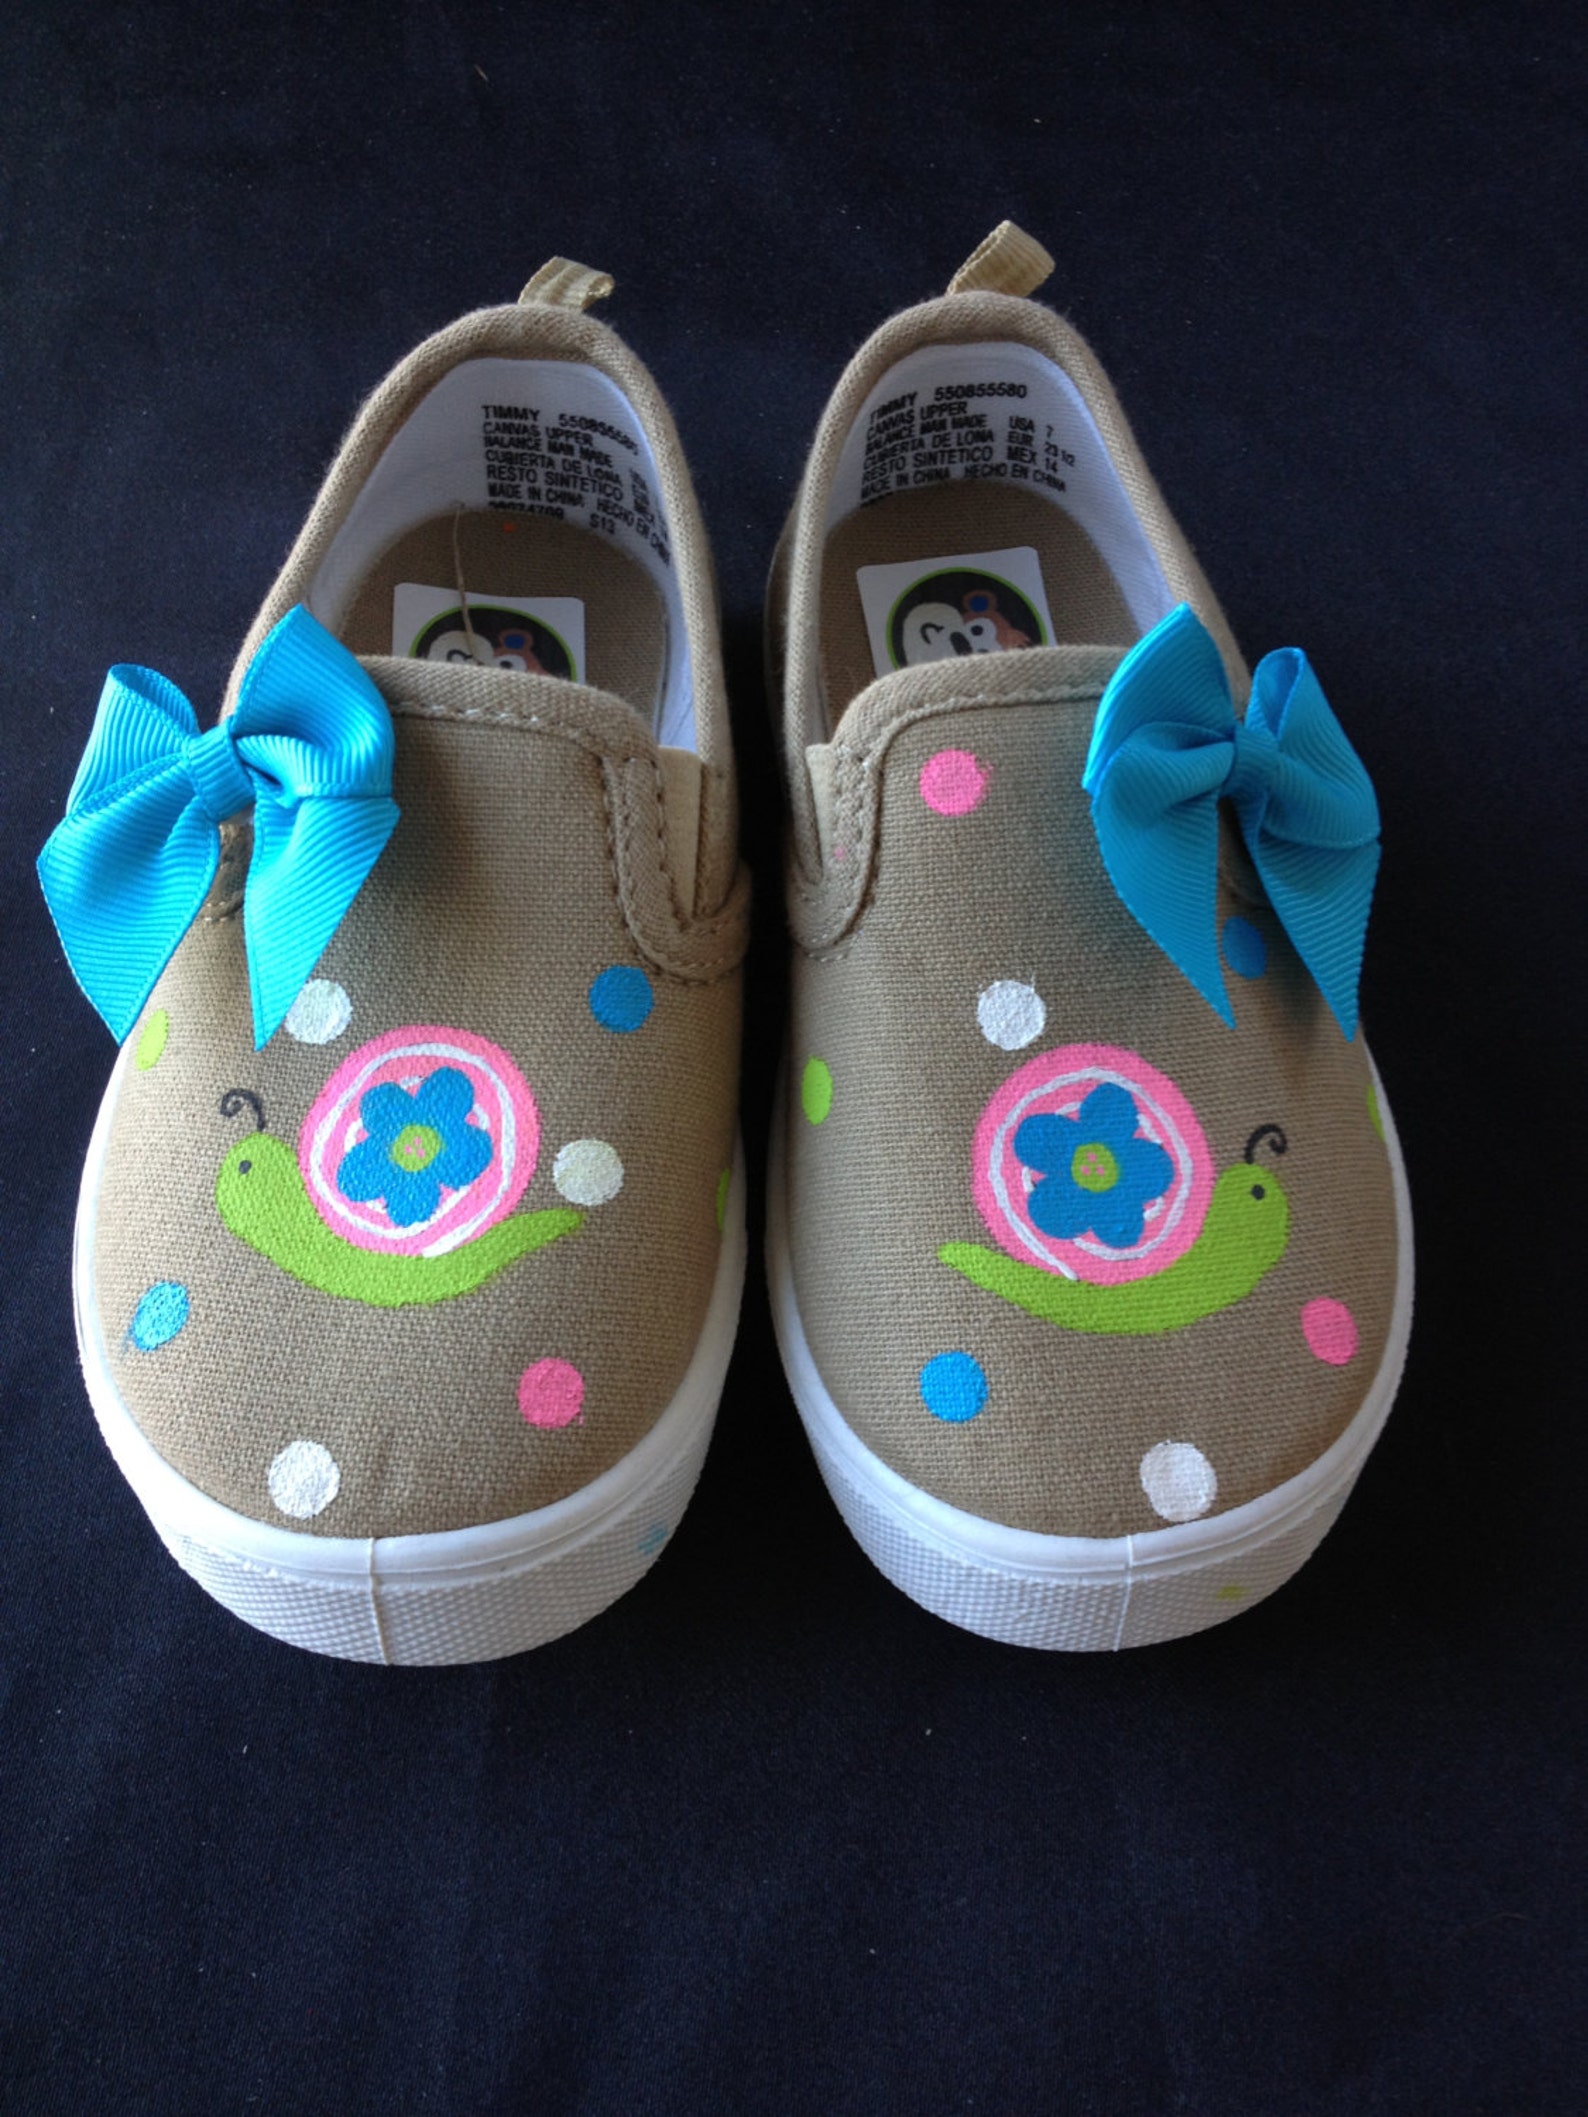 Hand Painted Snail Shoes - Etsy